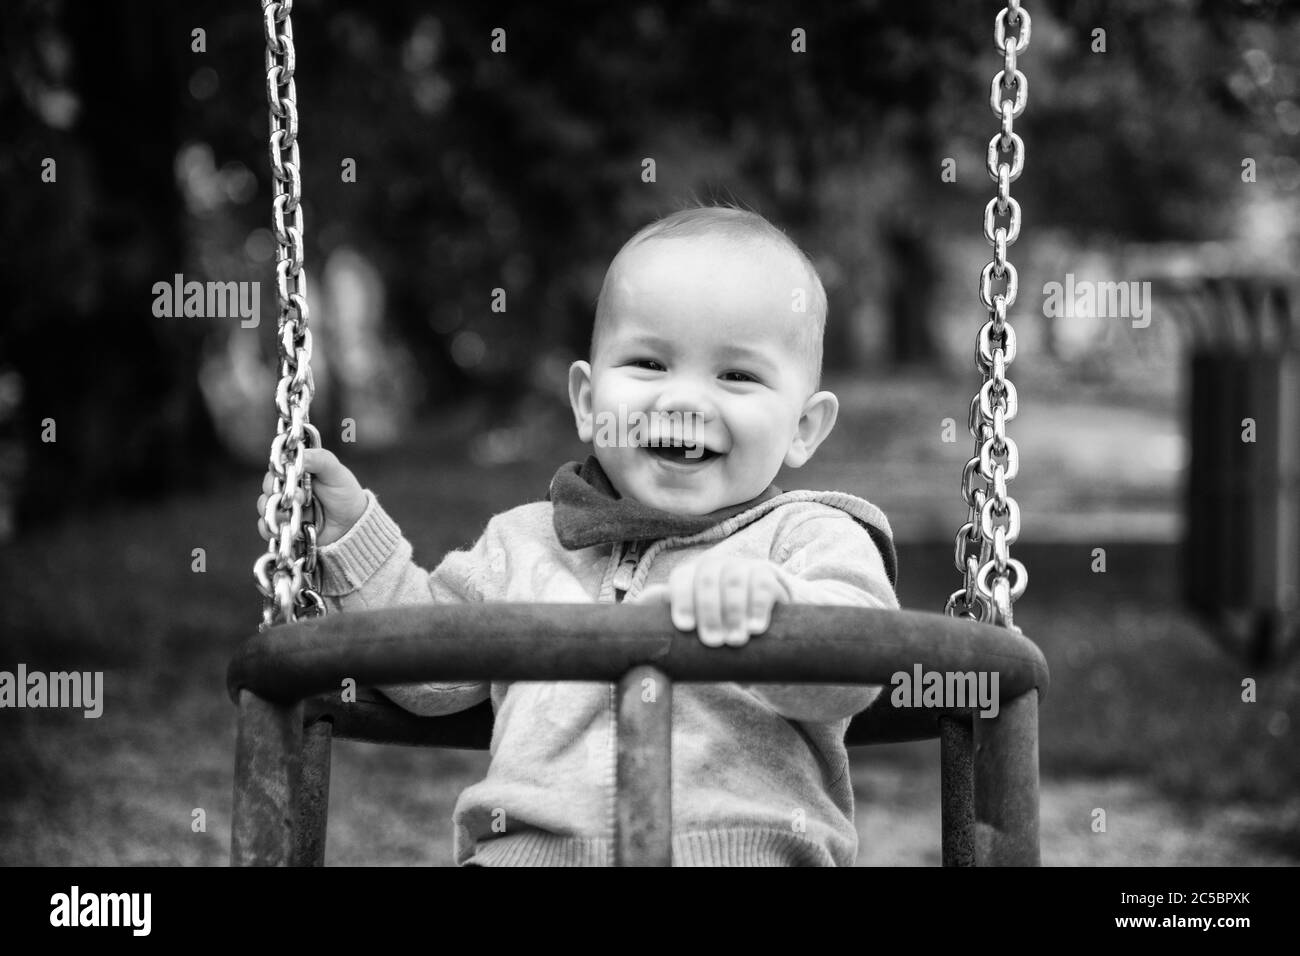 Happy Laughing Toddler Boy Having Fun on a Swing Enjoying a Day on a Playground in a Park Stock Photo